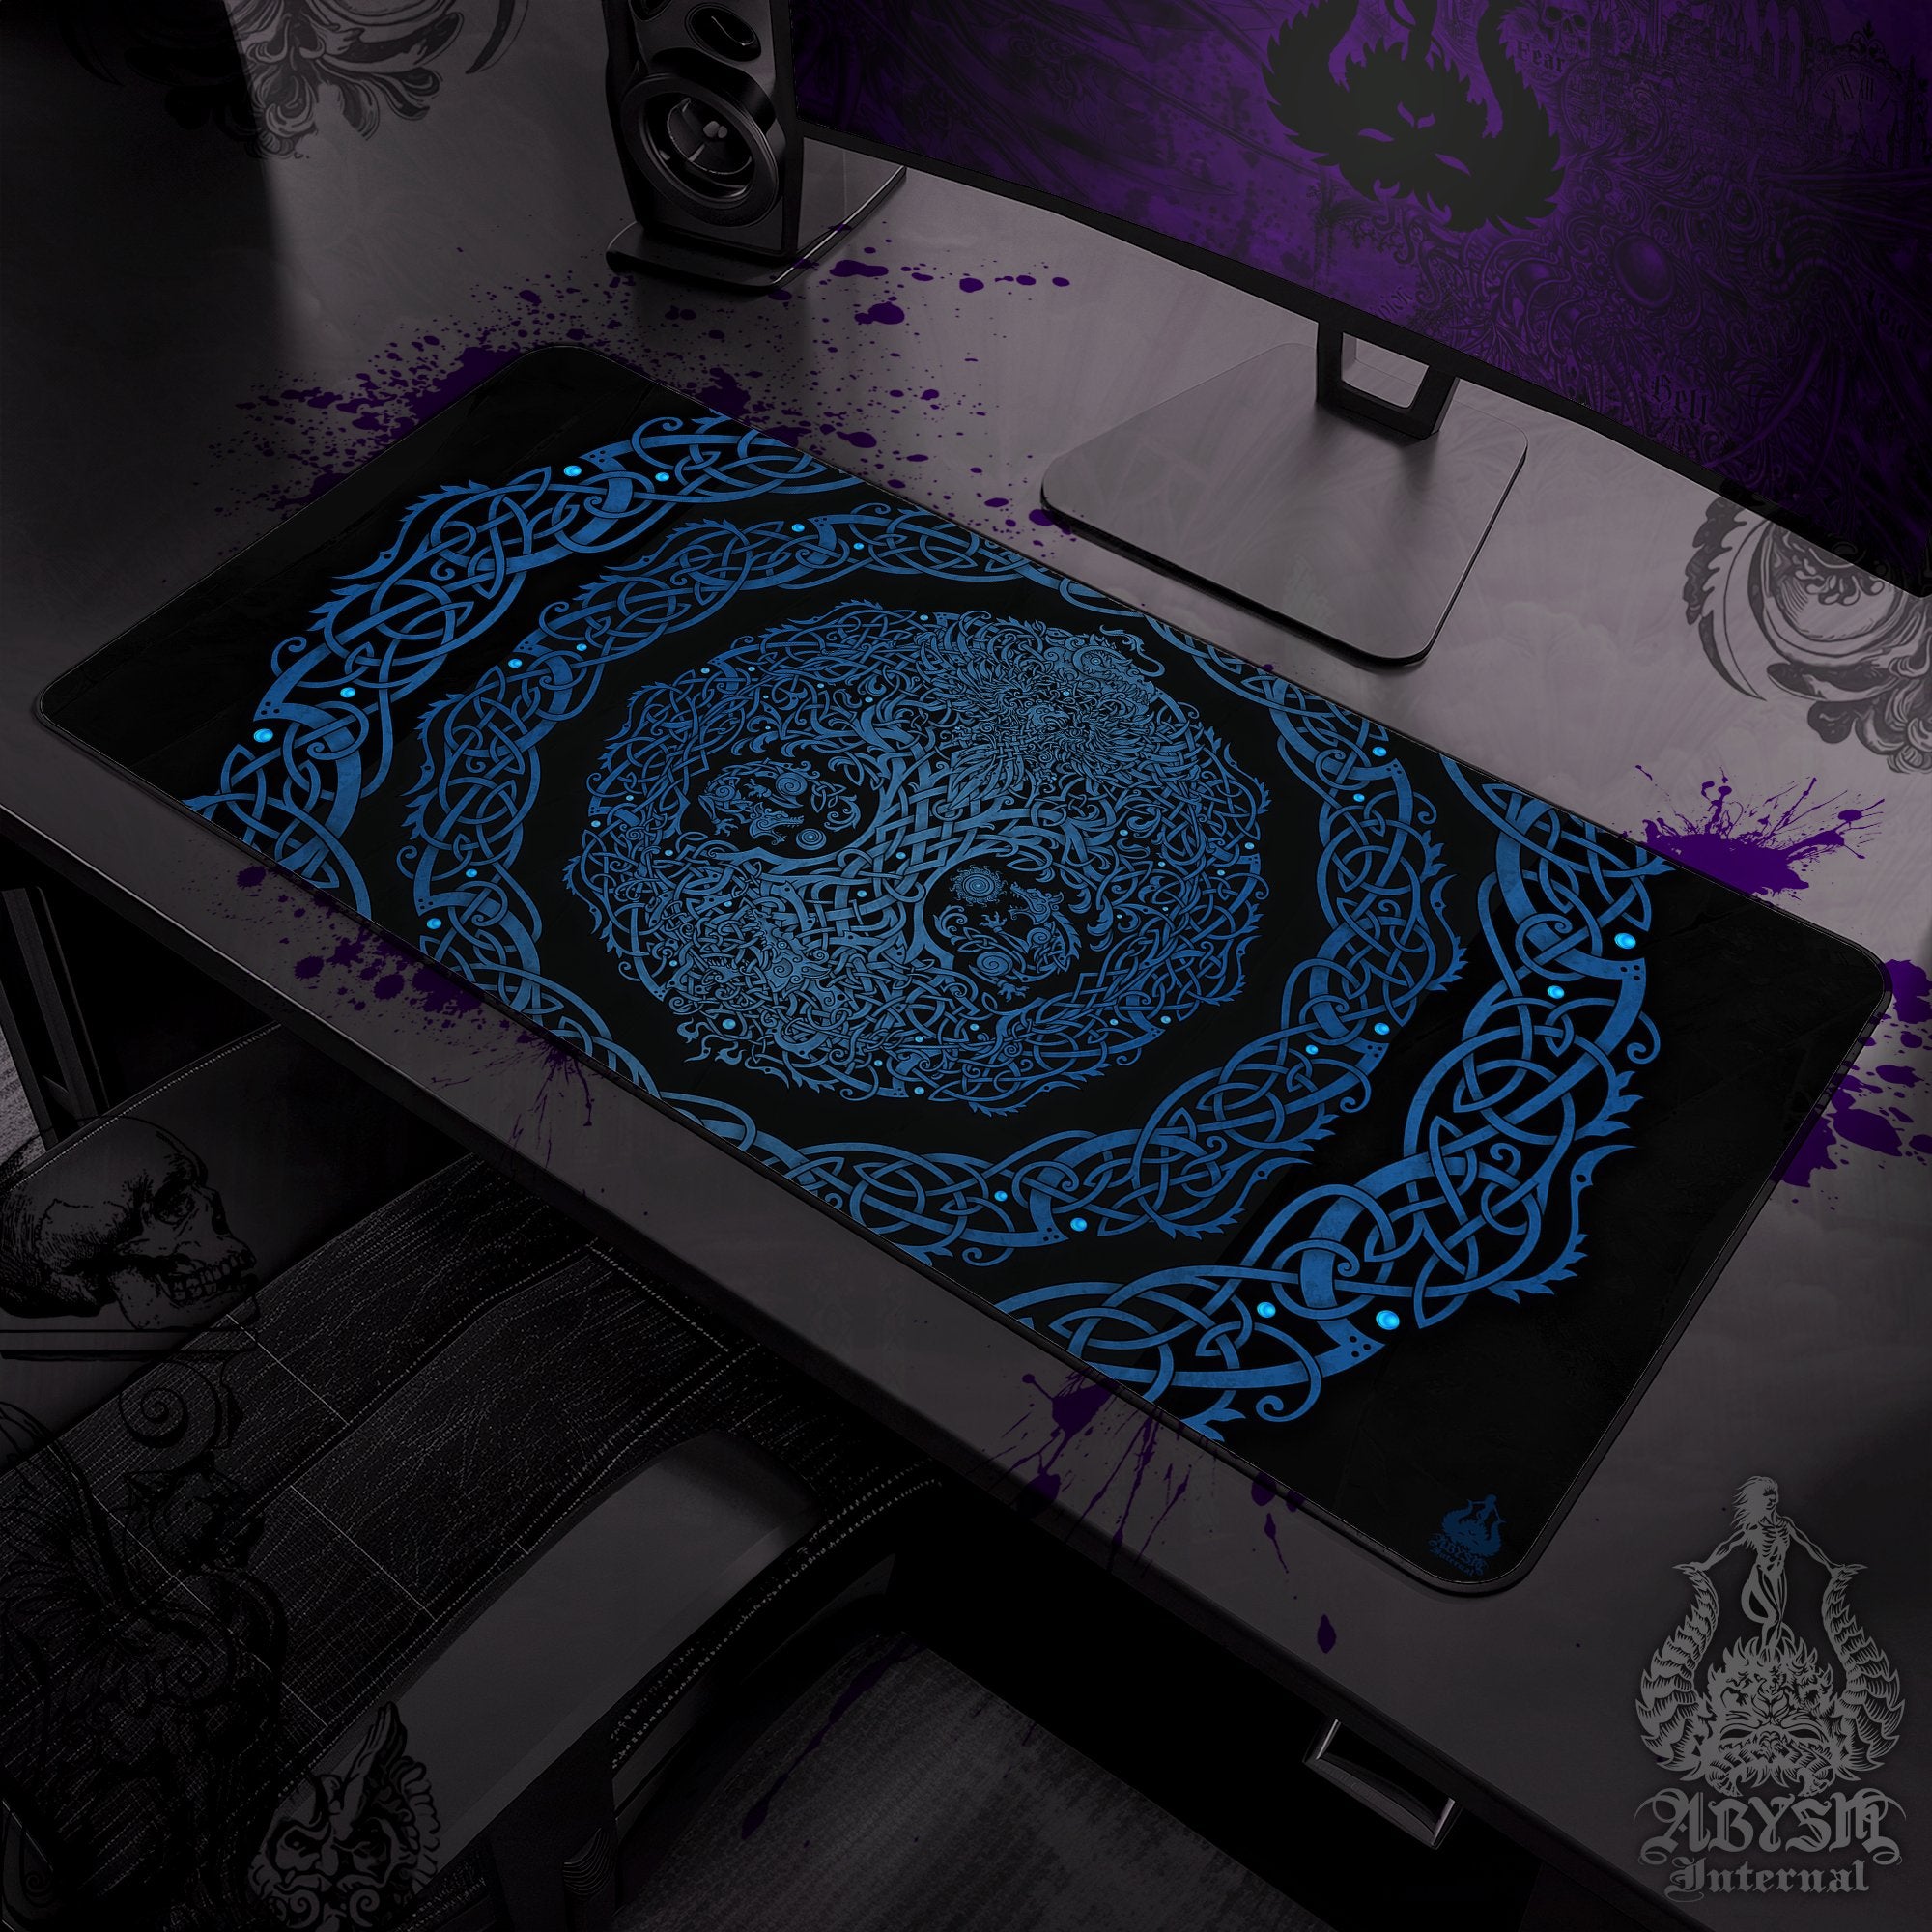 Yggdrasil Gaming Mouse Pad, Viking Desk Mat, Norse Tree of Life Table Protector Cover, Knotwork Workpad, Nordic Art Print - Blue, Black, Ice, Pastel Goth, 3 Colors - Abysm Internal